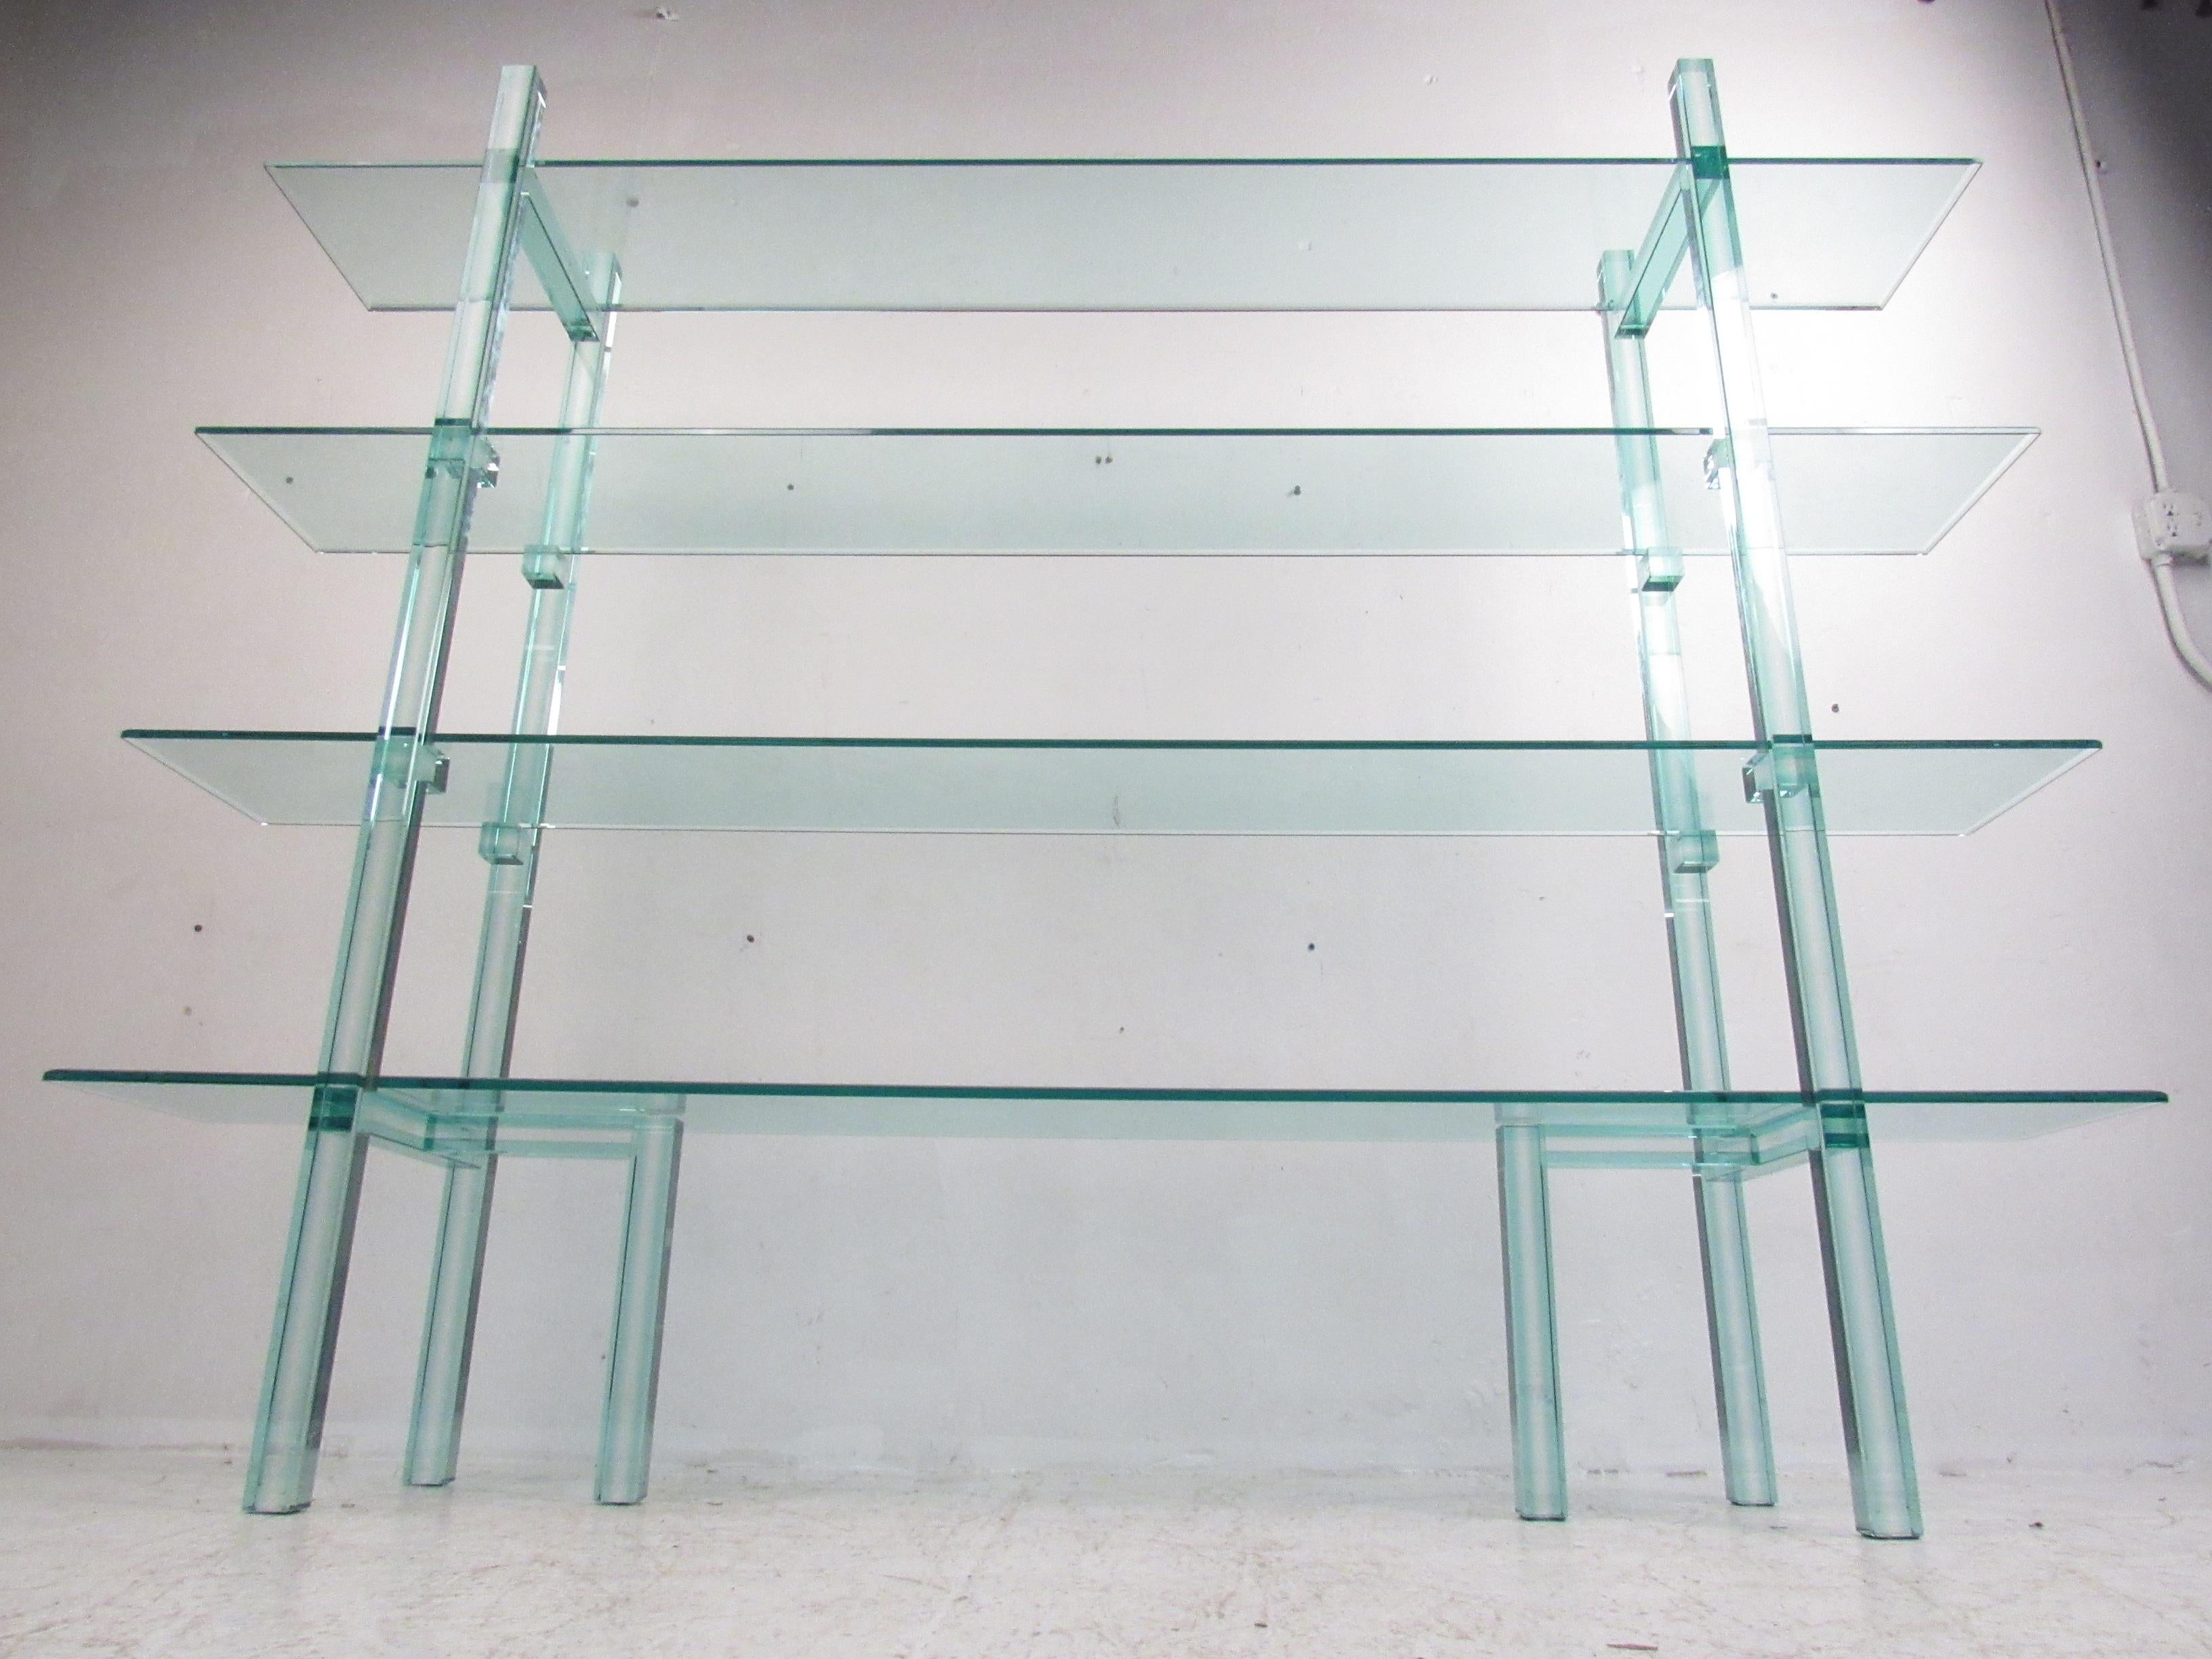 This stunning contemporary modern bookcase is made entirely of glass boasting an impressive blue-green tint through the thick beveled glass. Sleek and unusual design with two tripod base side supports that hold up all four, 86 inch wide glass